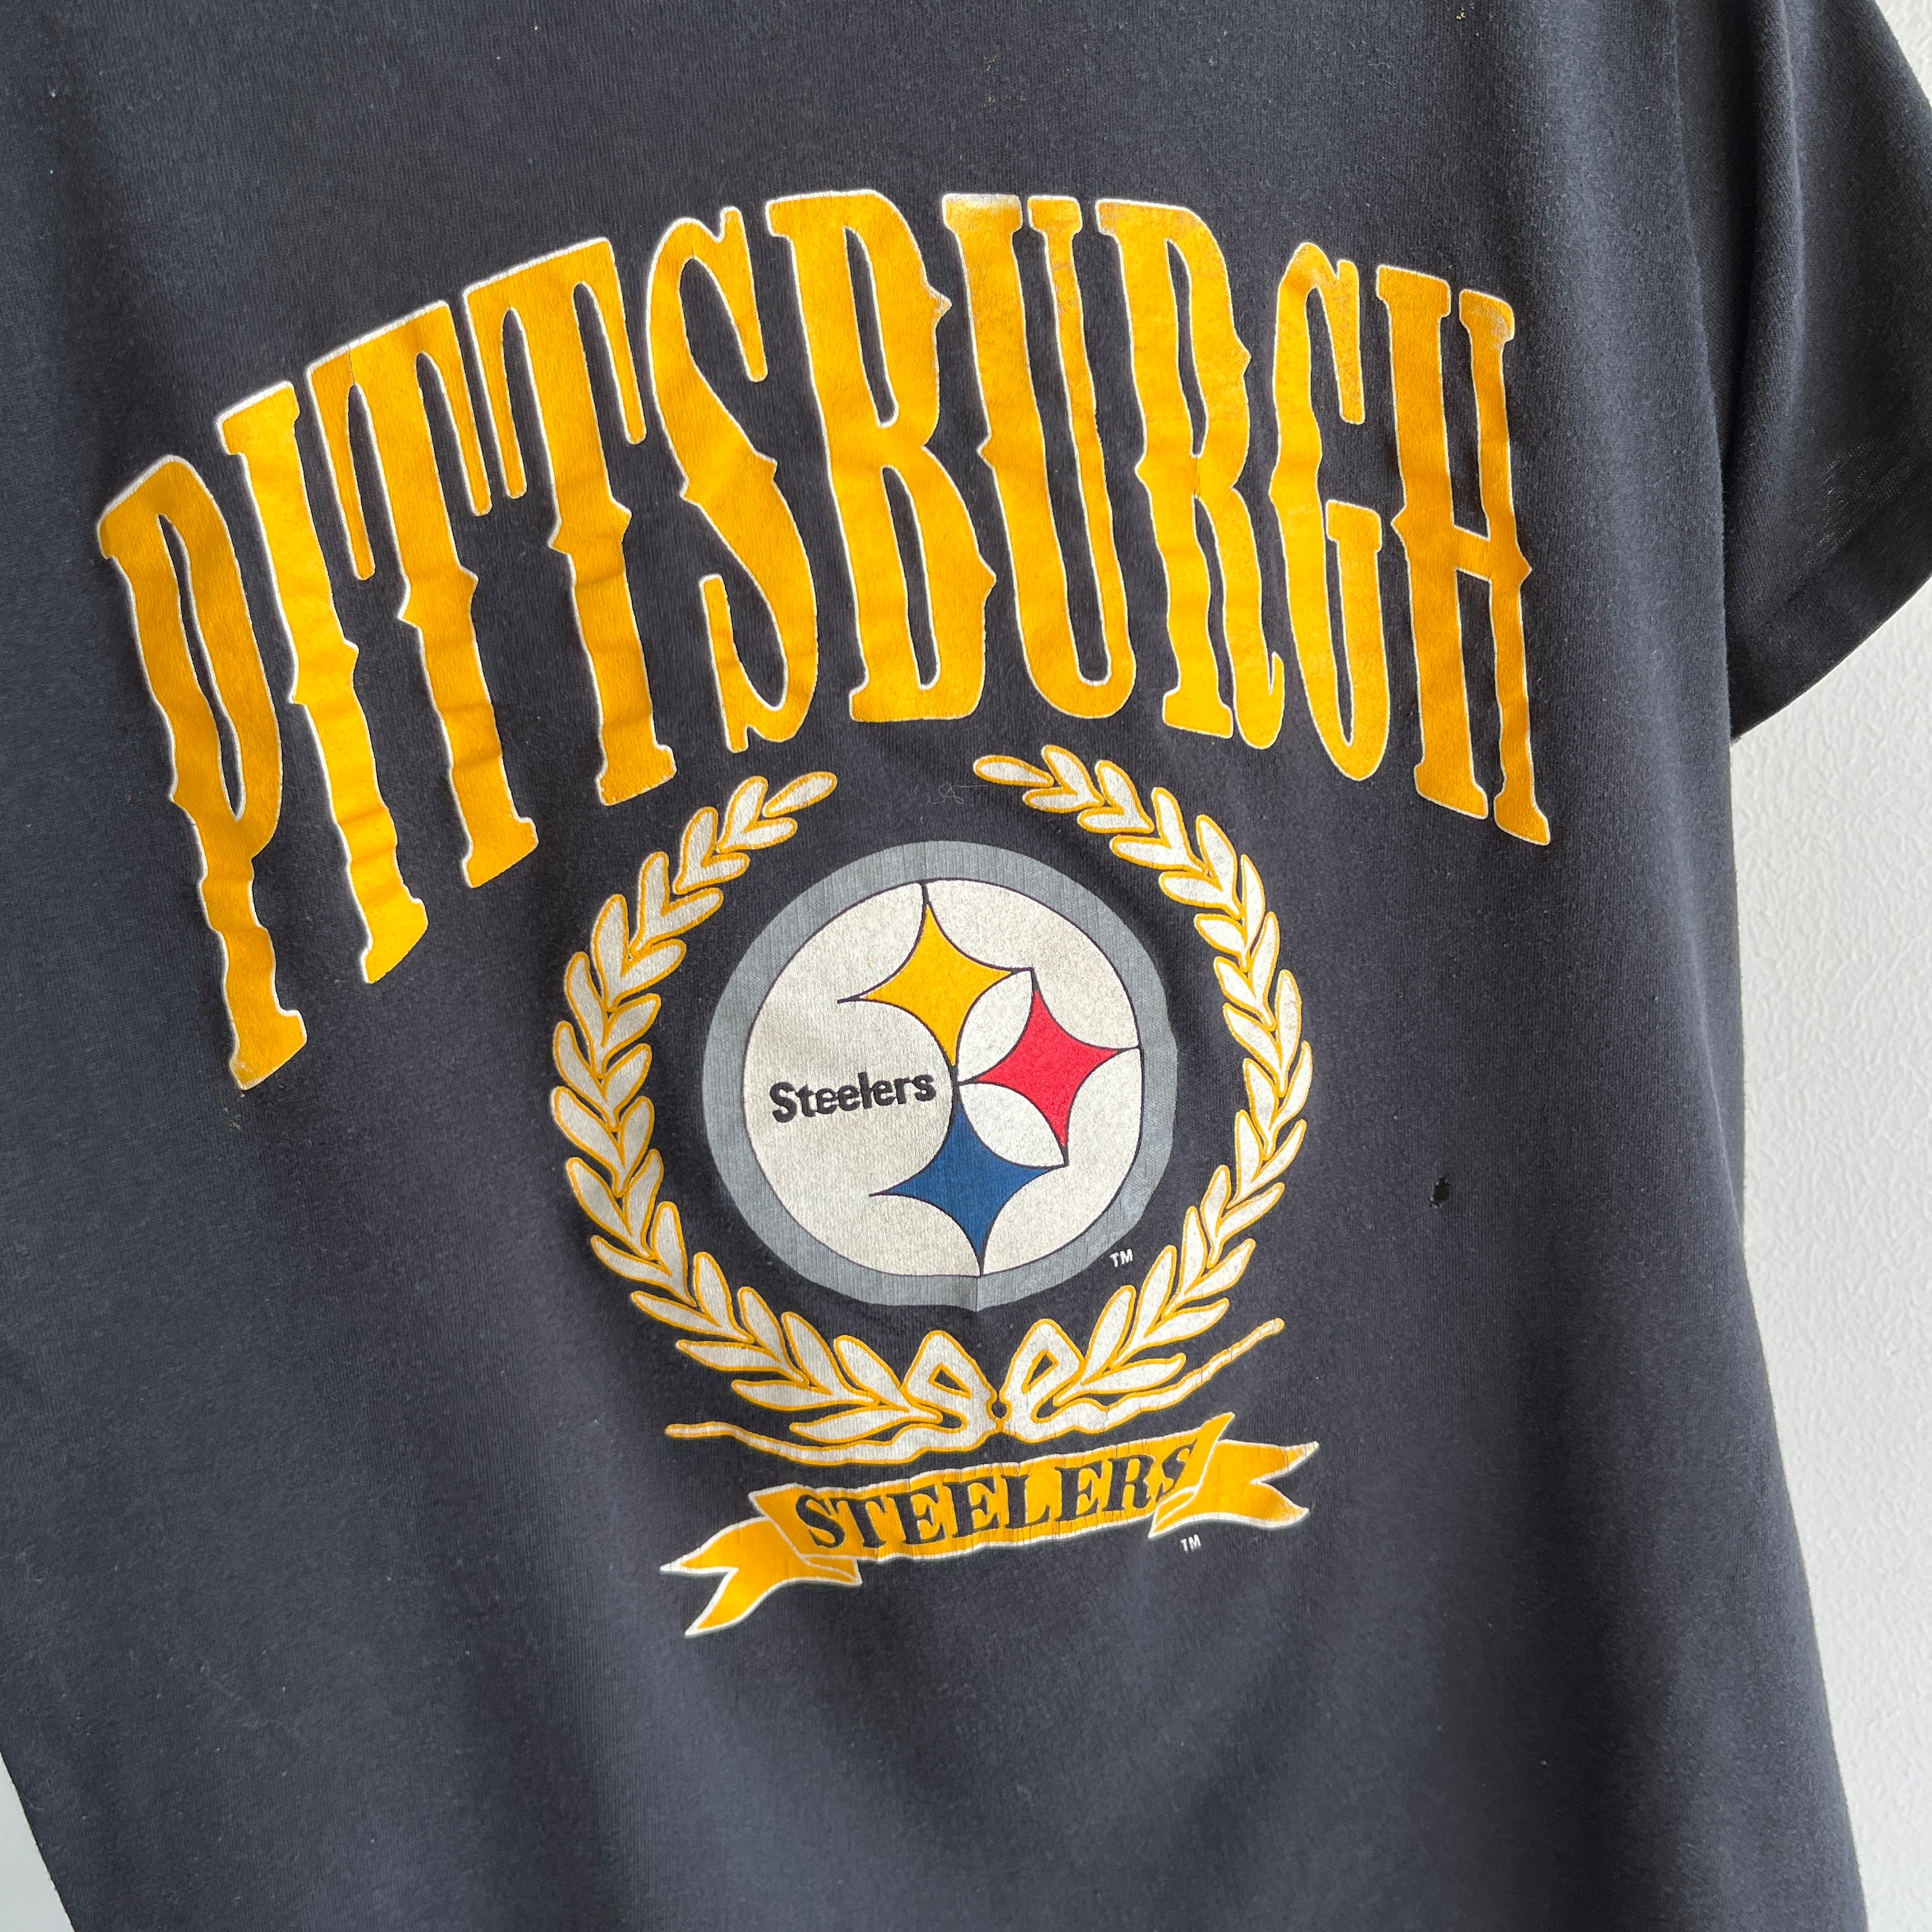 1980s Pittsburg Steelers NFL (Now For Ladies) T-Shirt by Artex